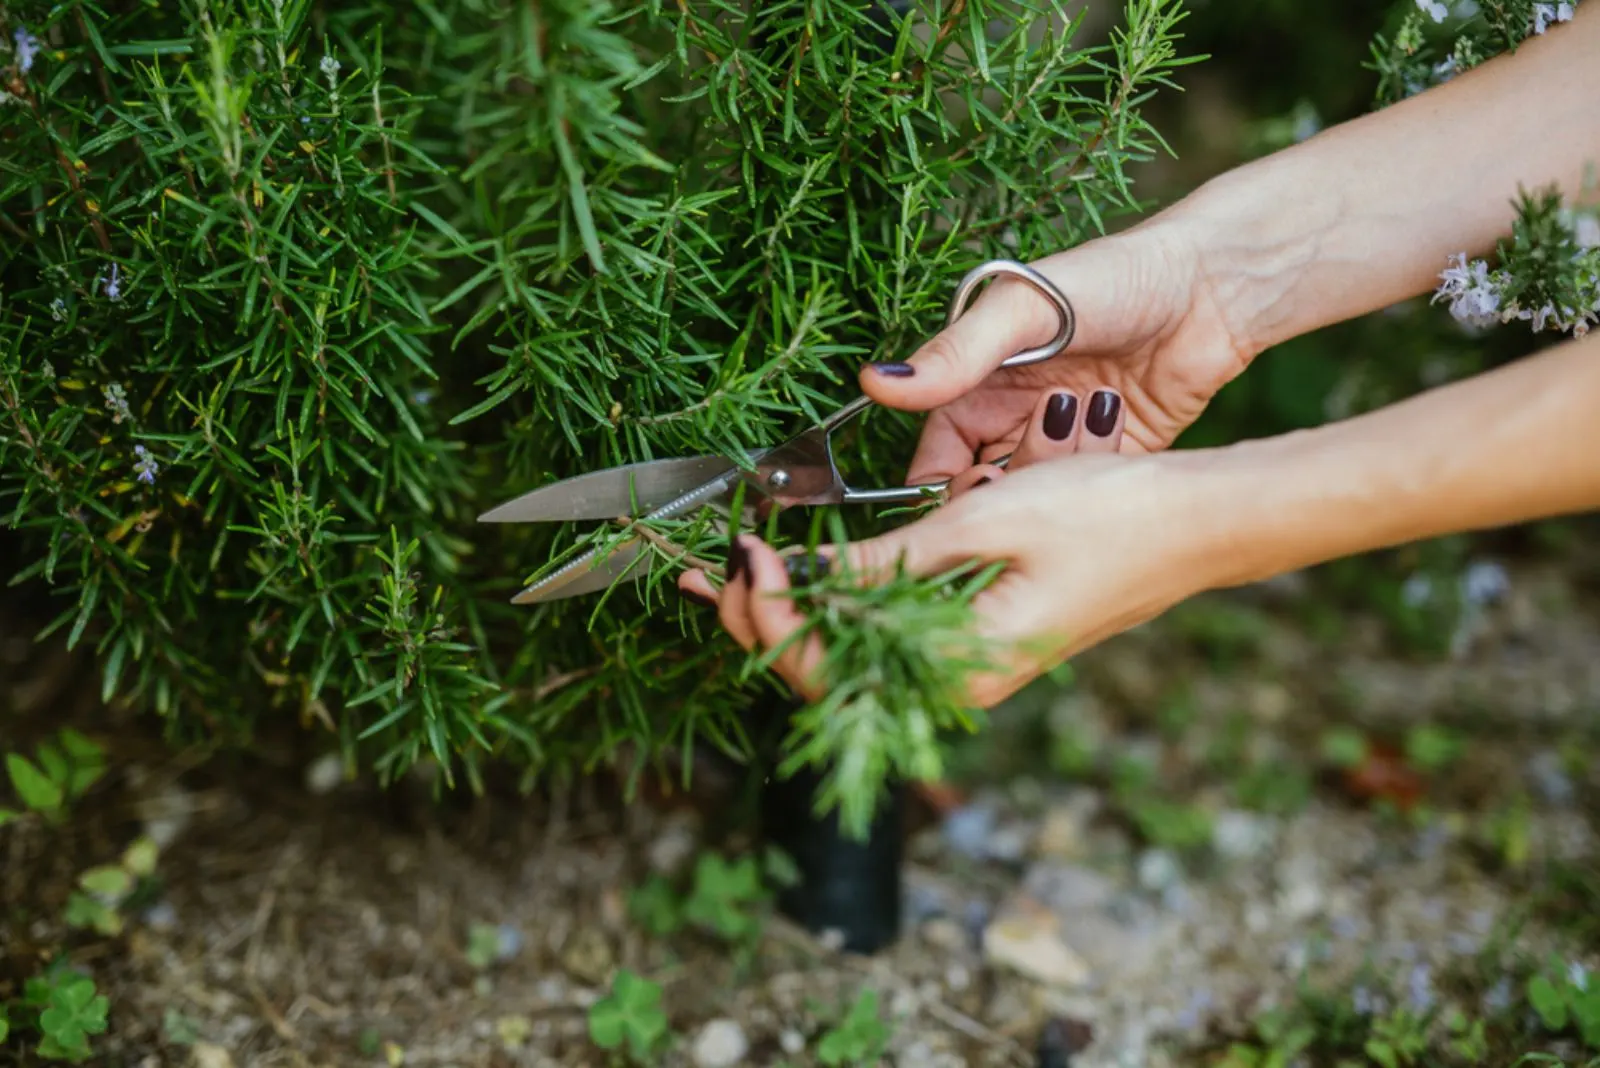 Woman cuts a rosemary branch with scissors